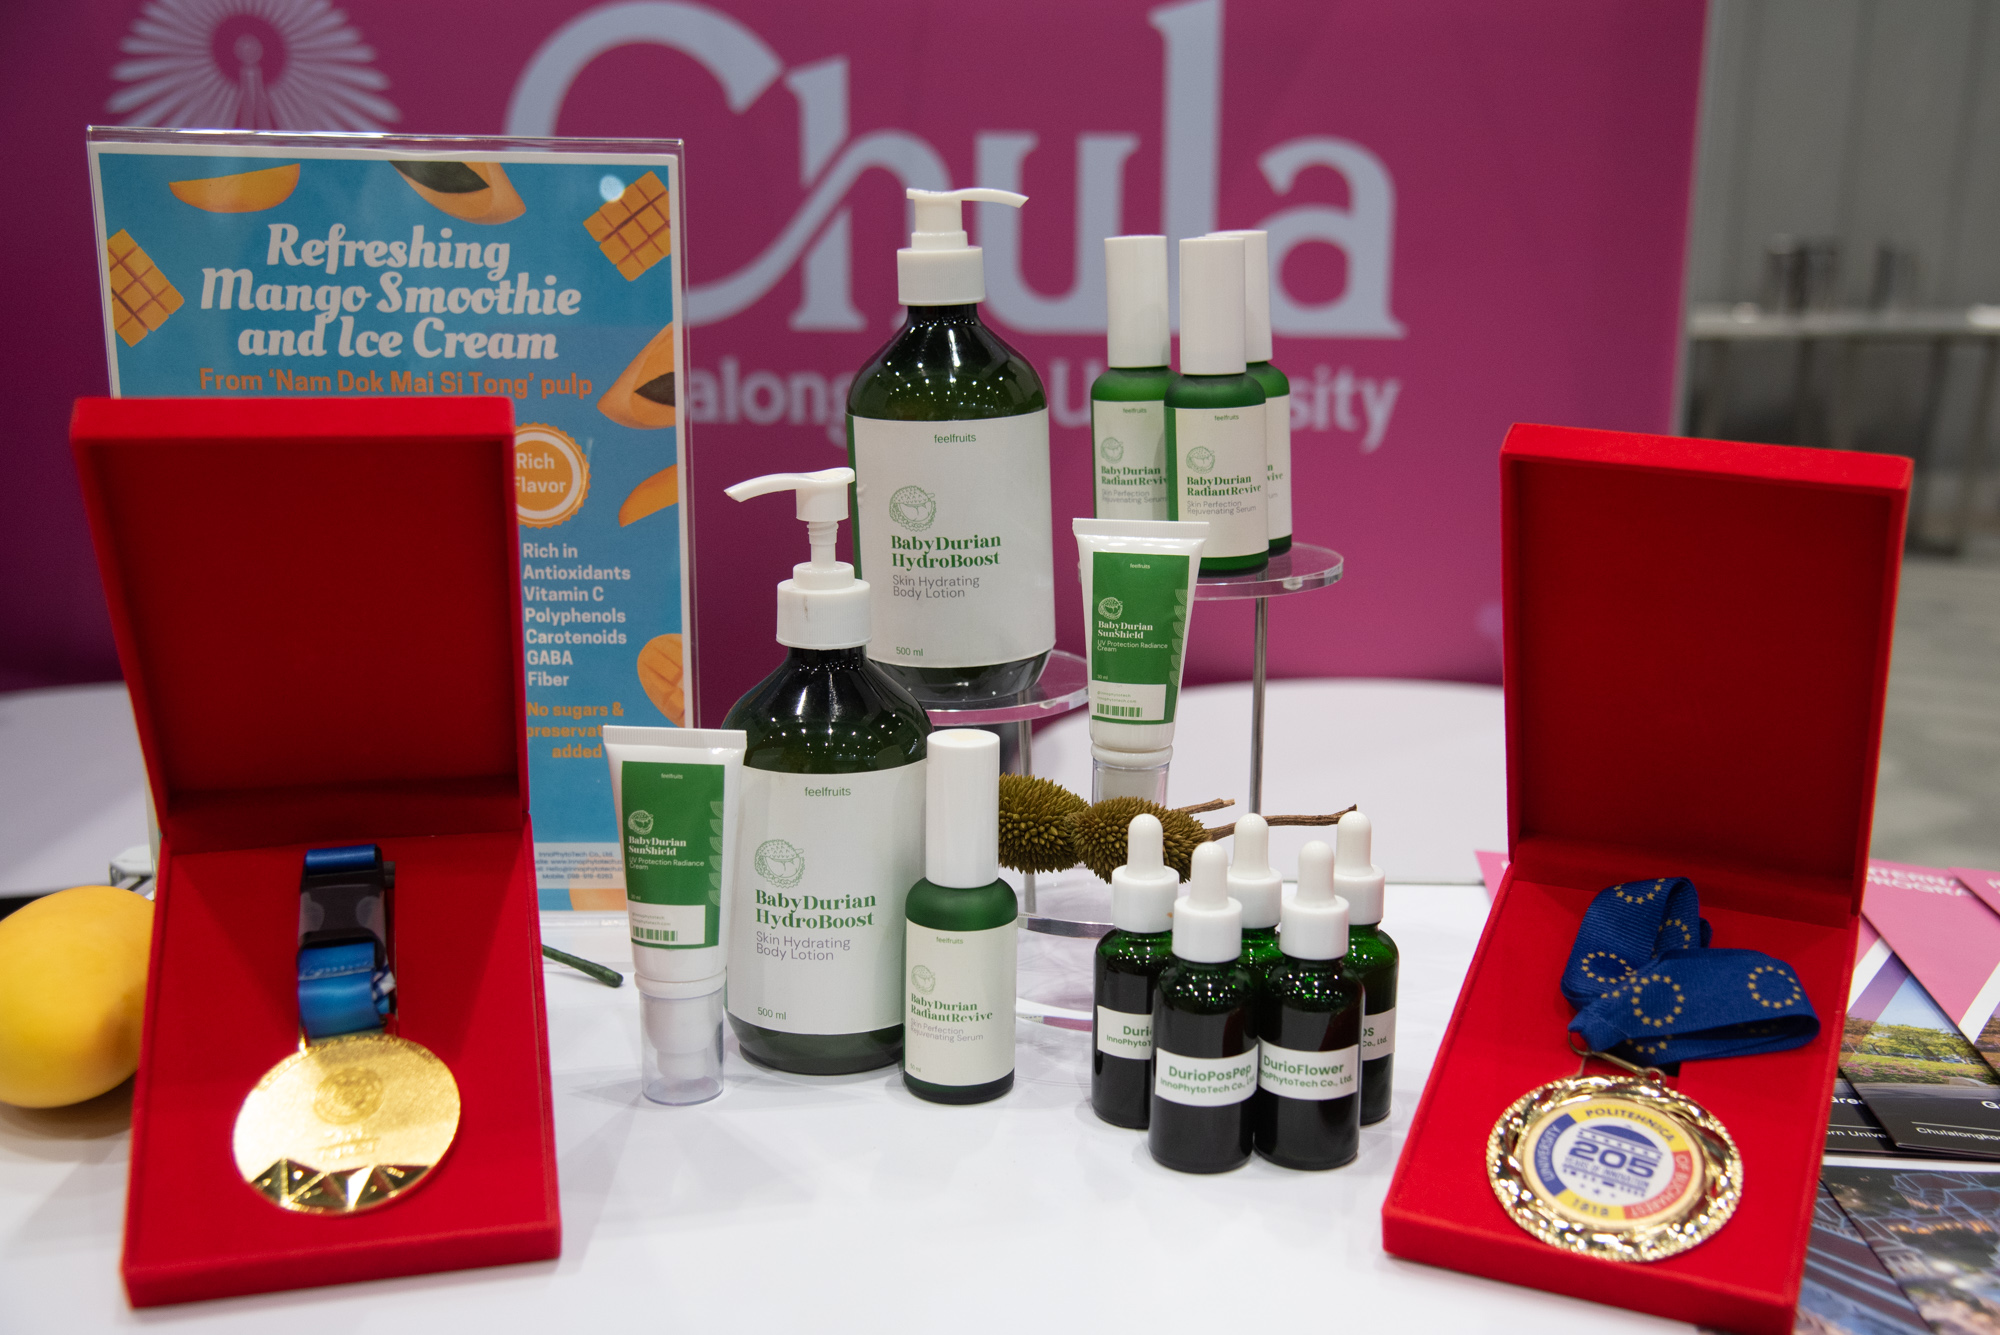 Chula Showcased at “Global Sustainable Development Congress 2024”